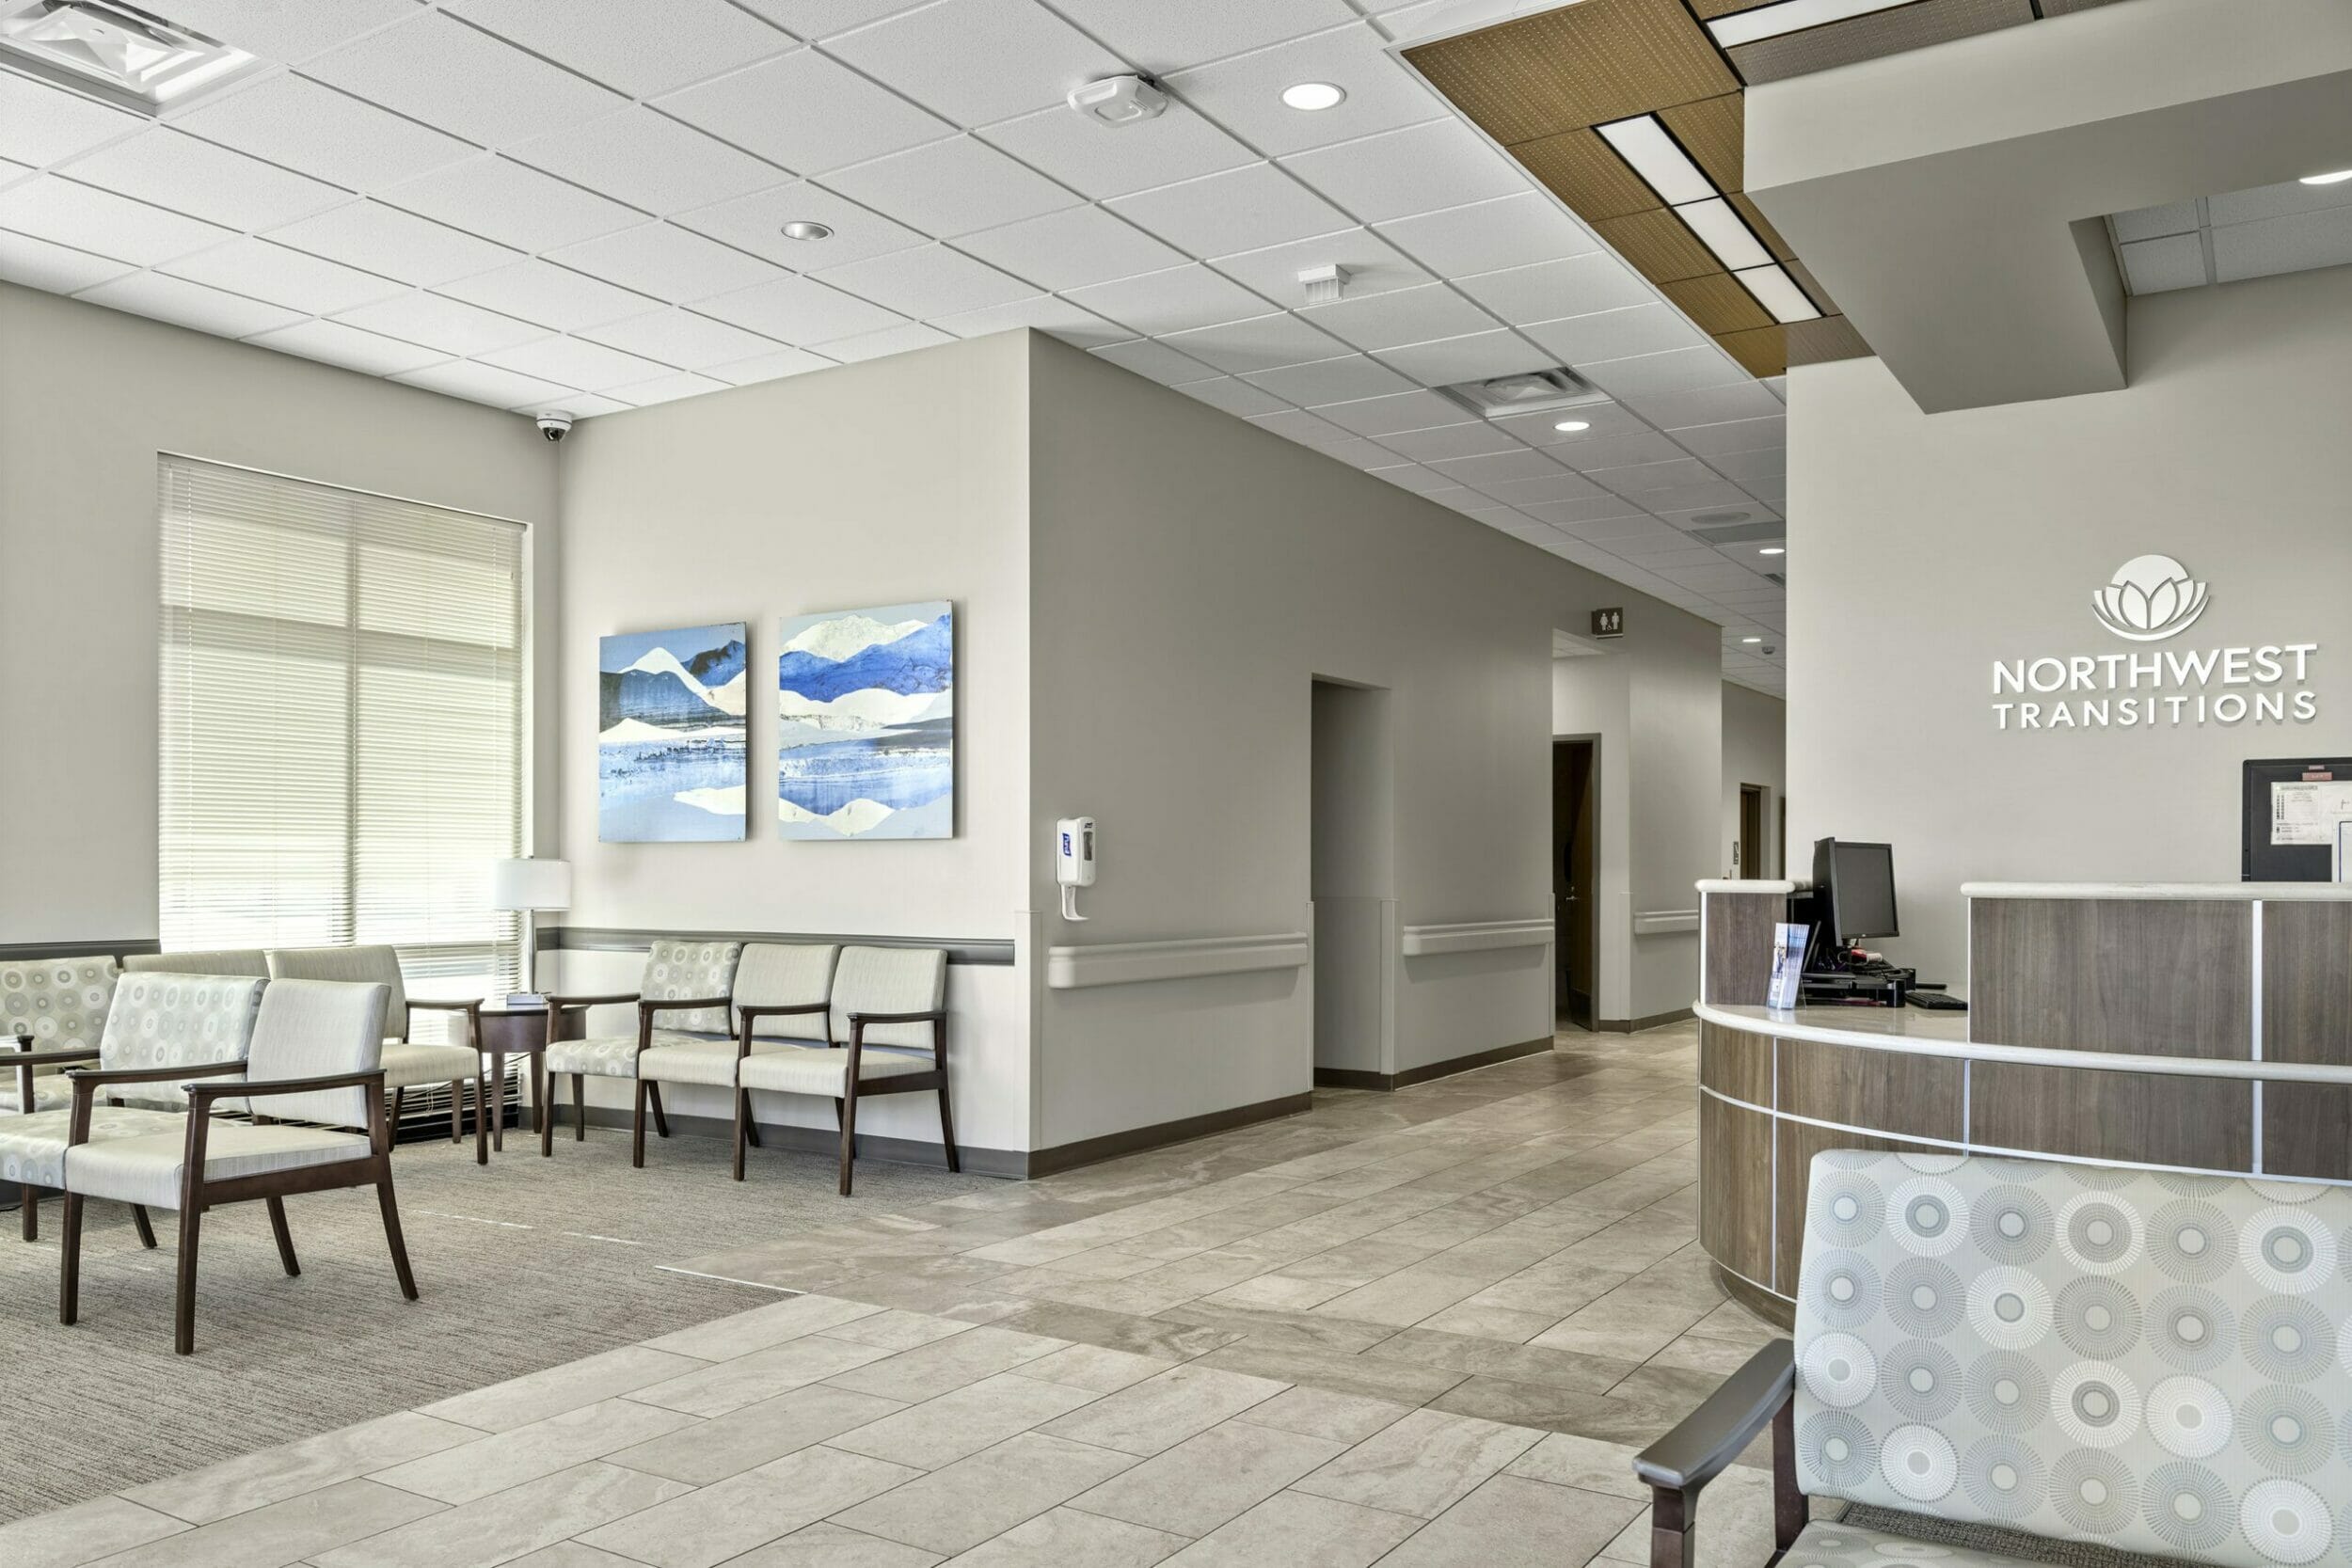 NorthWest Transitions gray lobby with tile and capret floor with multiple chairs to sit and a wood front desk